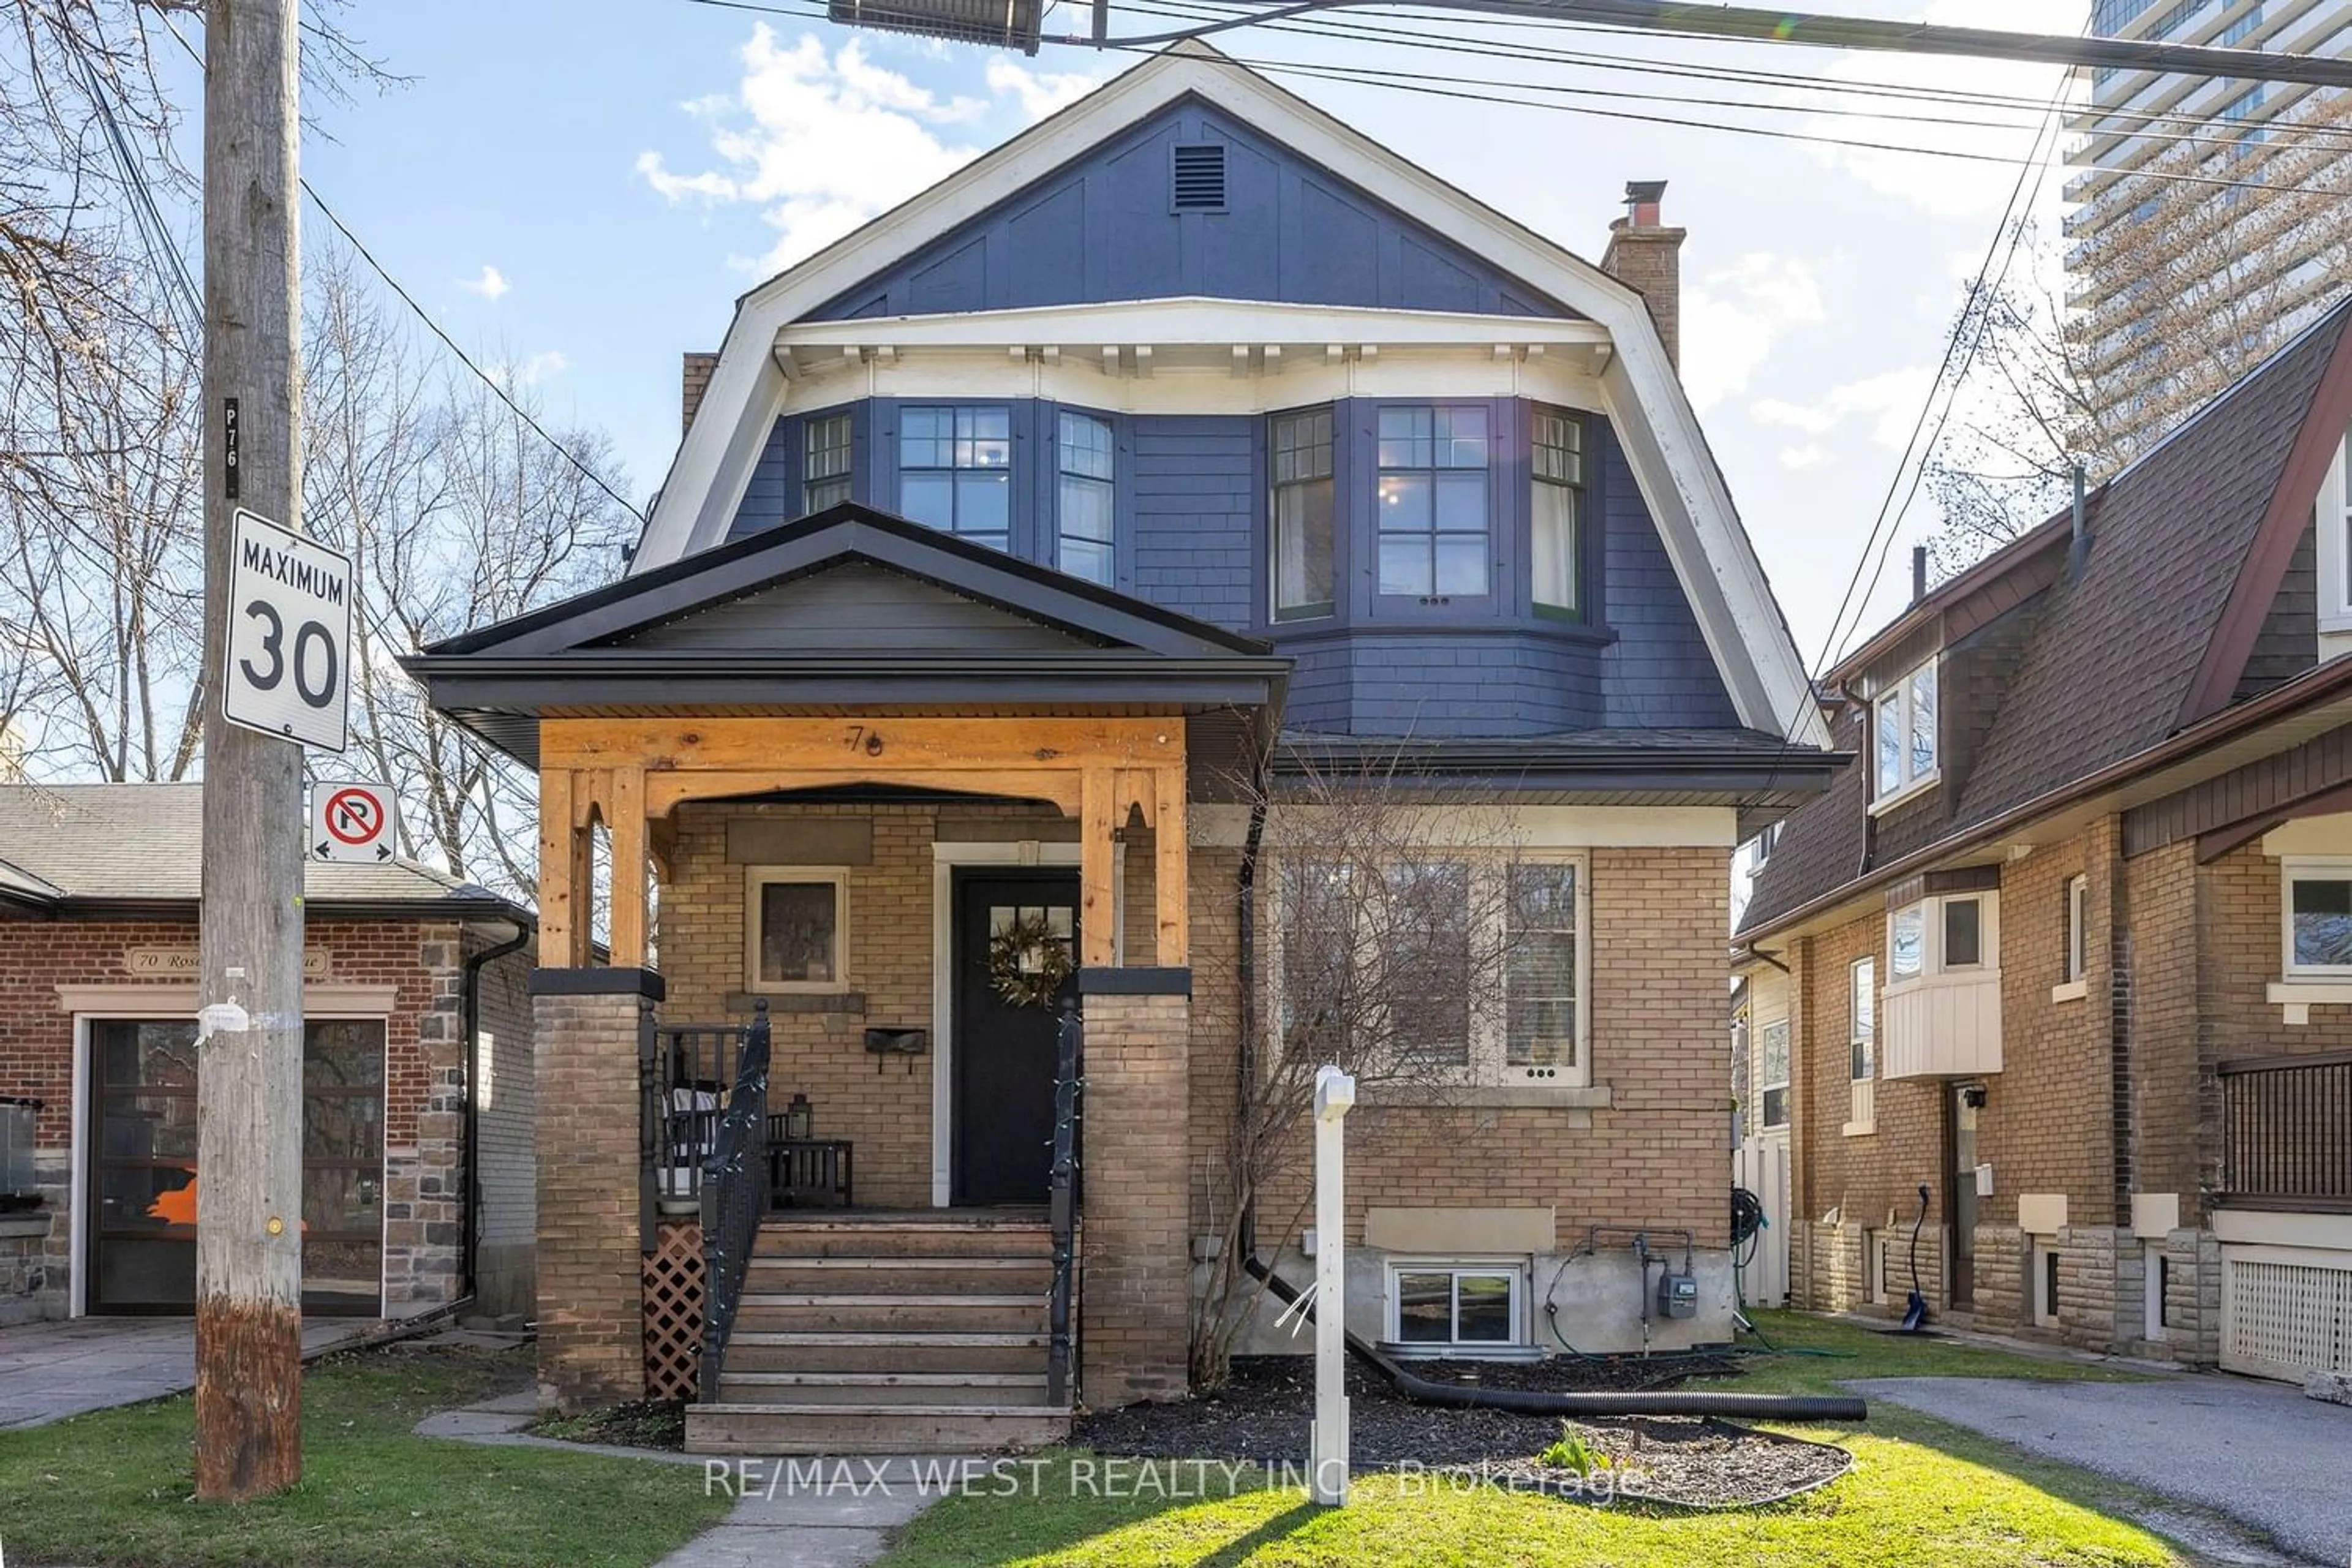 Home with brick exterior material for 76 Rosemount Ave, Toronto Ontario M9N 3B3